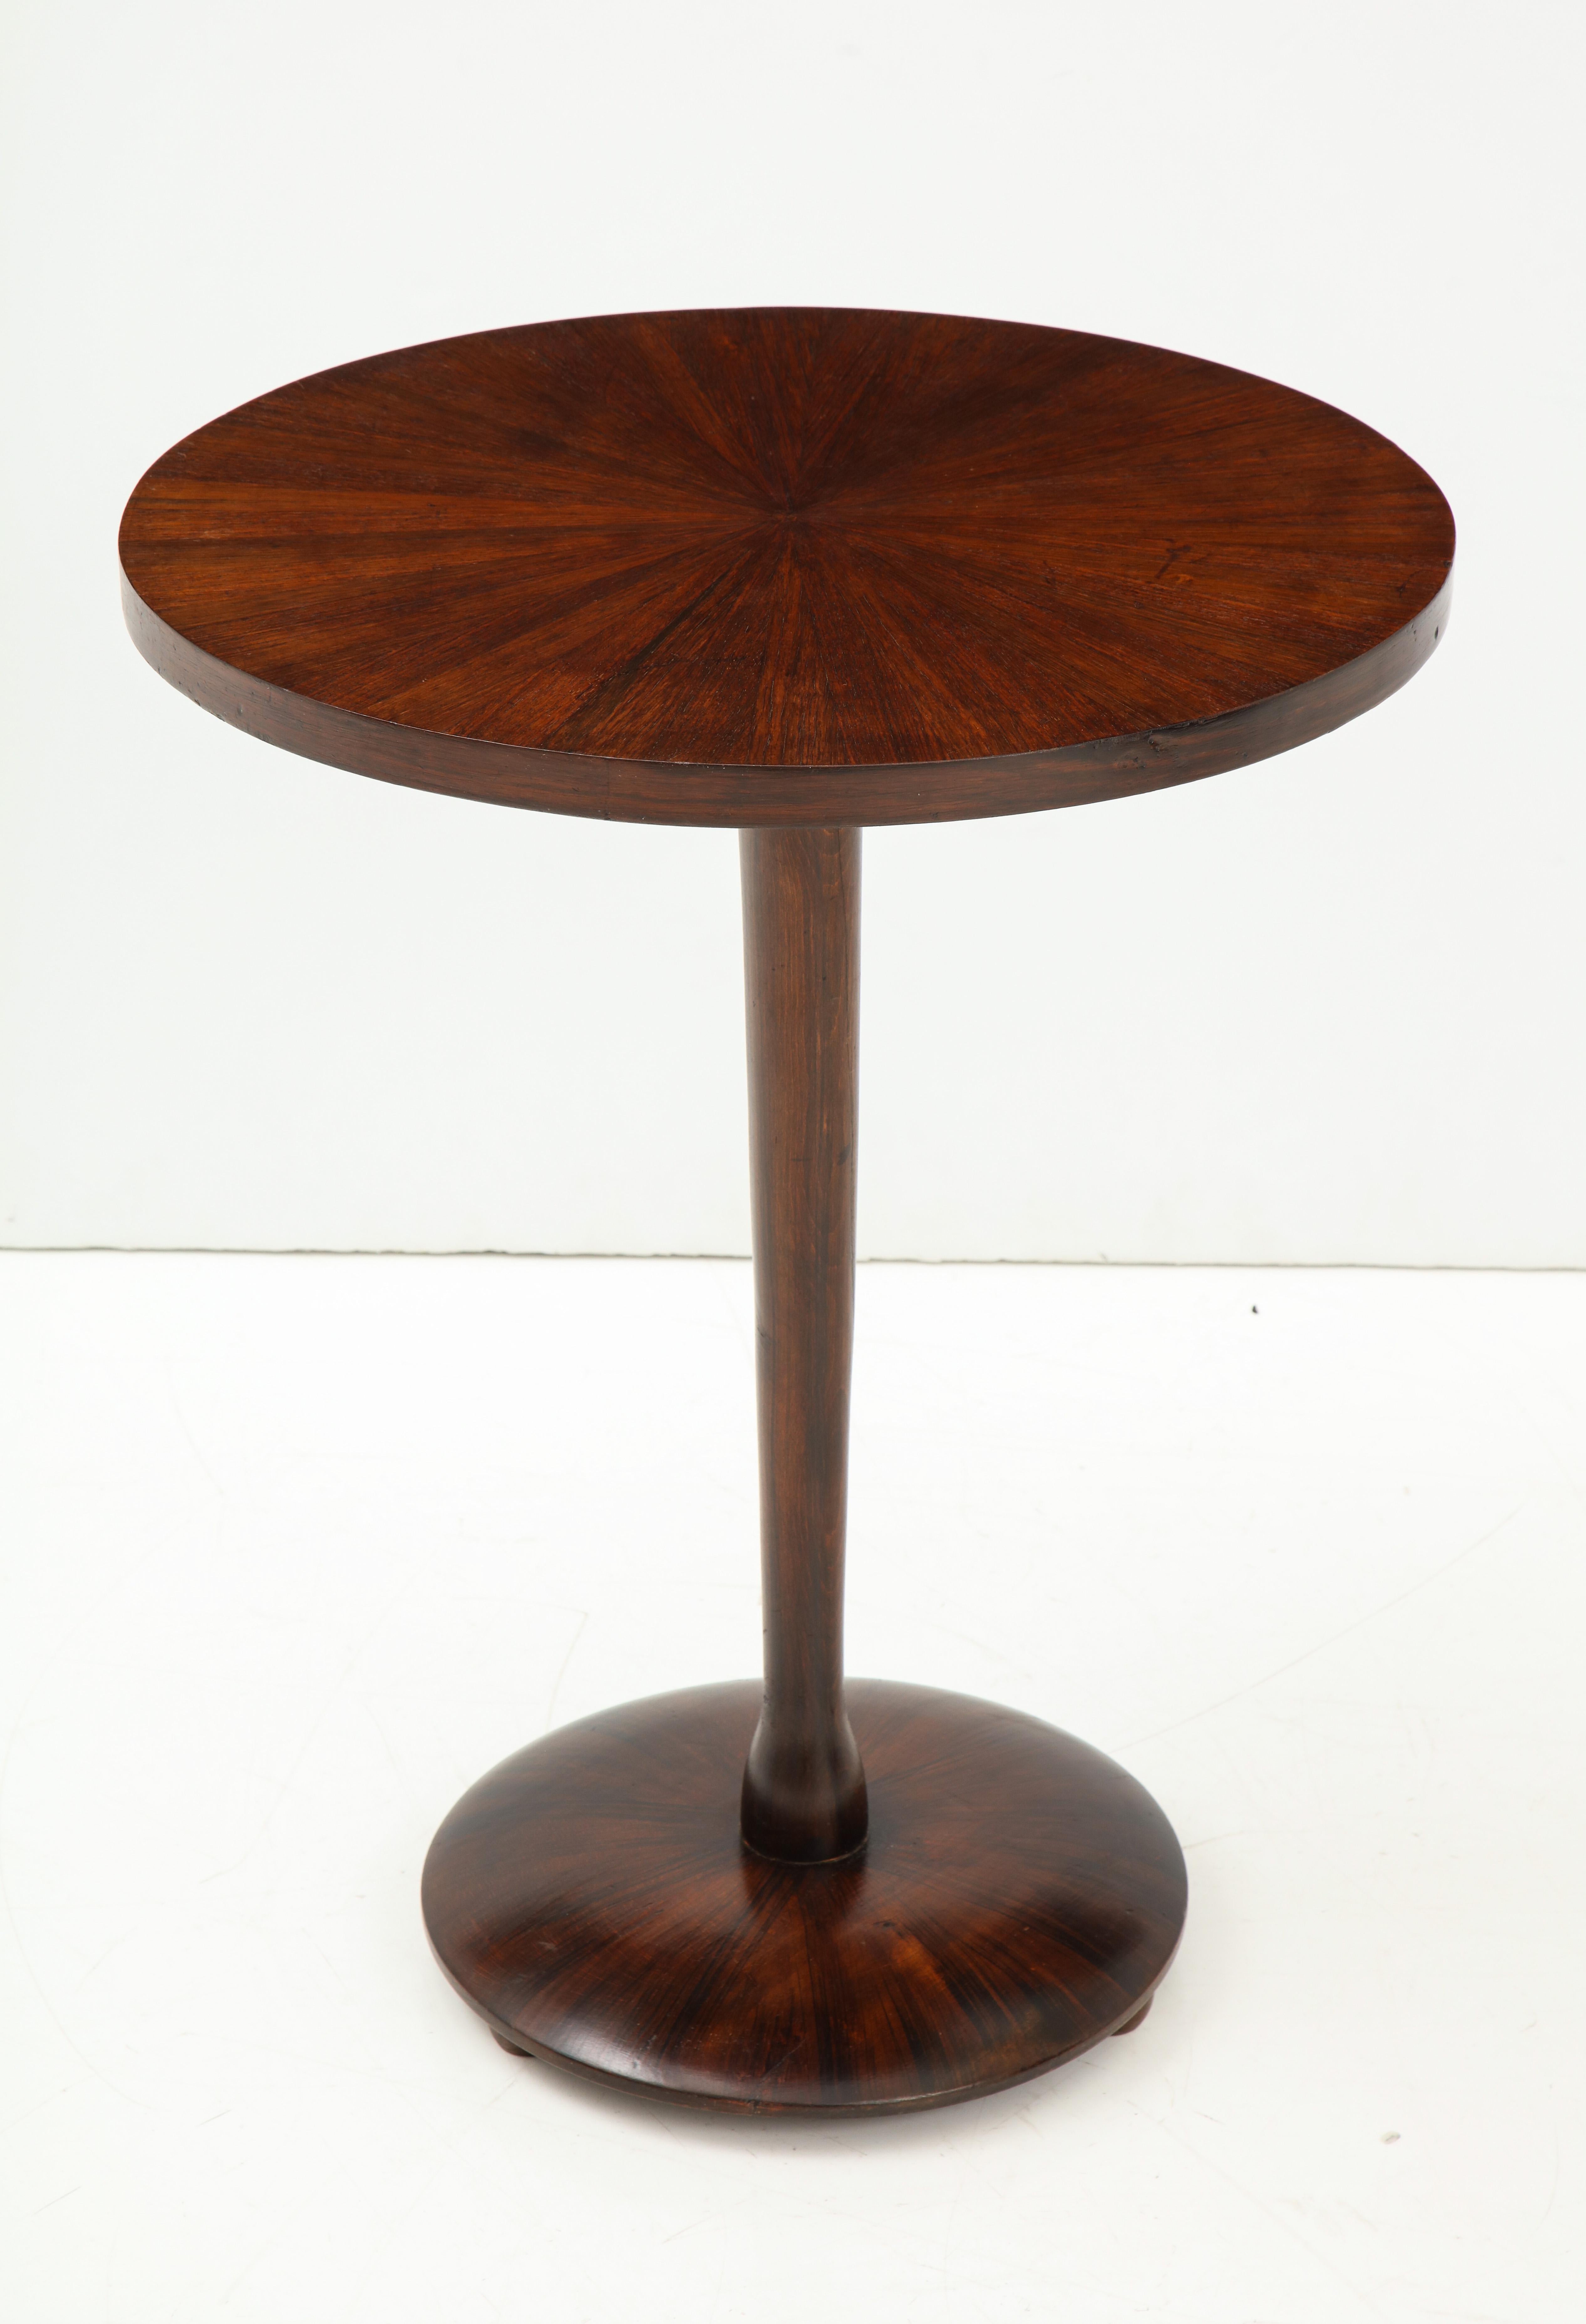 Italian rosewood circular side table with columnar support and shaped base.
Italy, circa 1960.
Size: 29” high x 23” diameter.